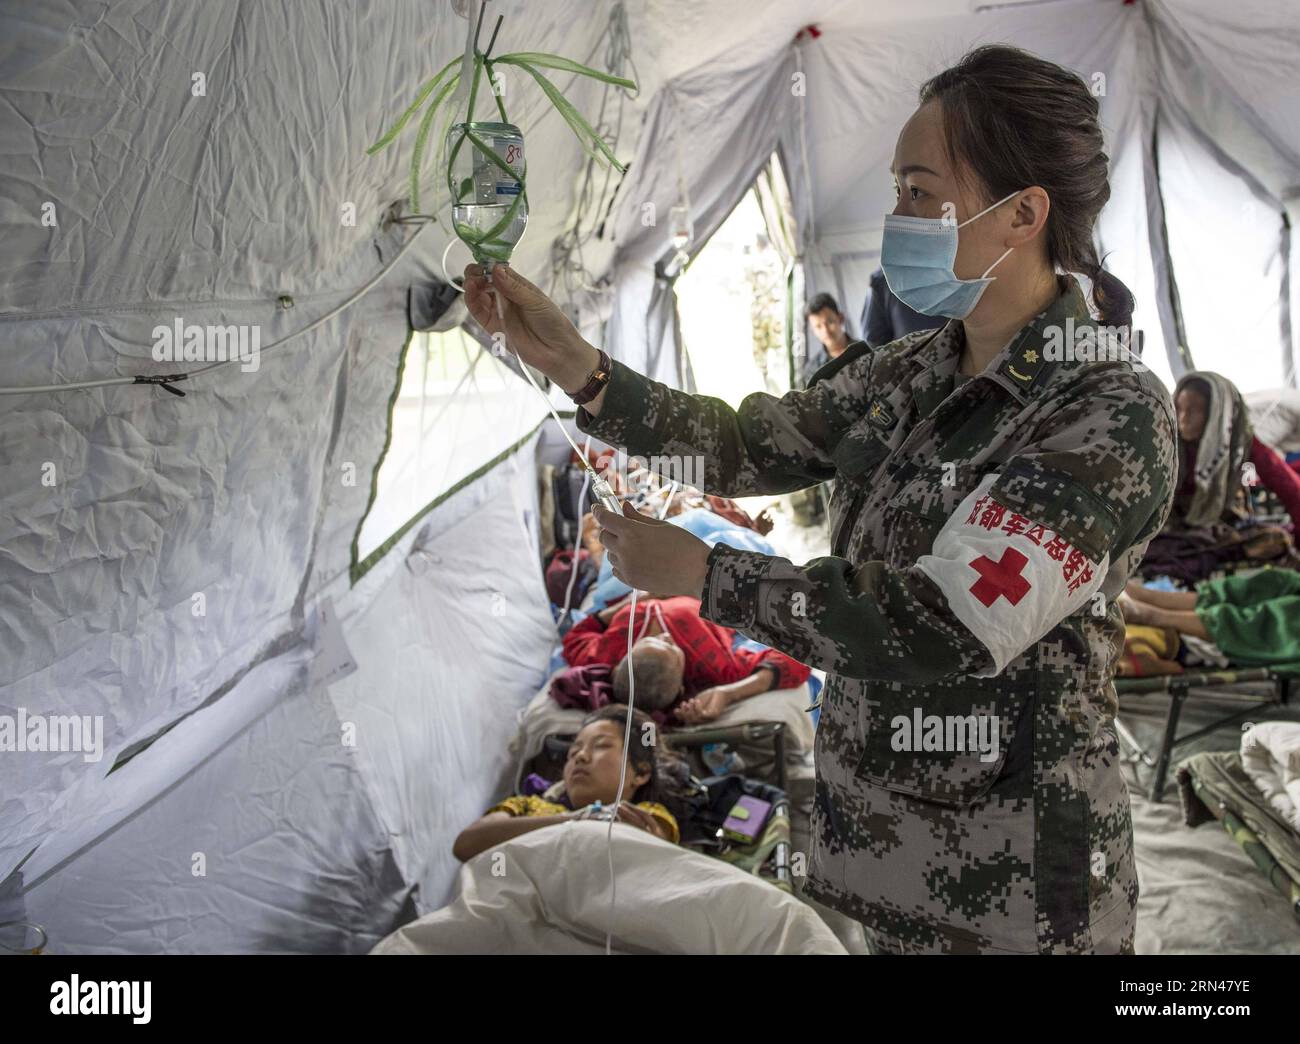 A nurse of emergency department of China s Chengdu Military Region Medical Team gives transfusion treatment for a patient in Kathmandu, Nepal, May 10, 2015. Since the arrival, the Chengdu Military Region Medical Team, the only foreign aid team capable of performing full-spectrum bone- related surgical operations, has treated over 200 patients, conducted more than 100 surgical operations, including 34 major ones. The team has also provided psychological counseling to nearly 500 people, and has disinfected a total area of over 850,000 square meters. In contrast to their typical International Nur Stock Photo